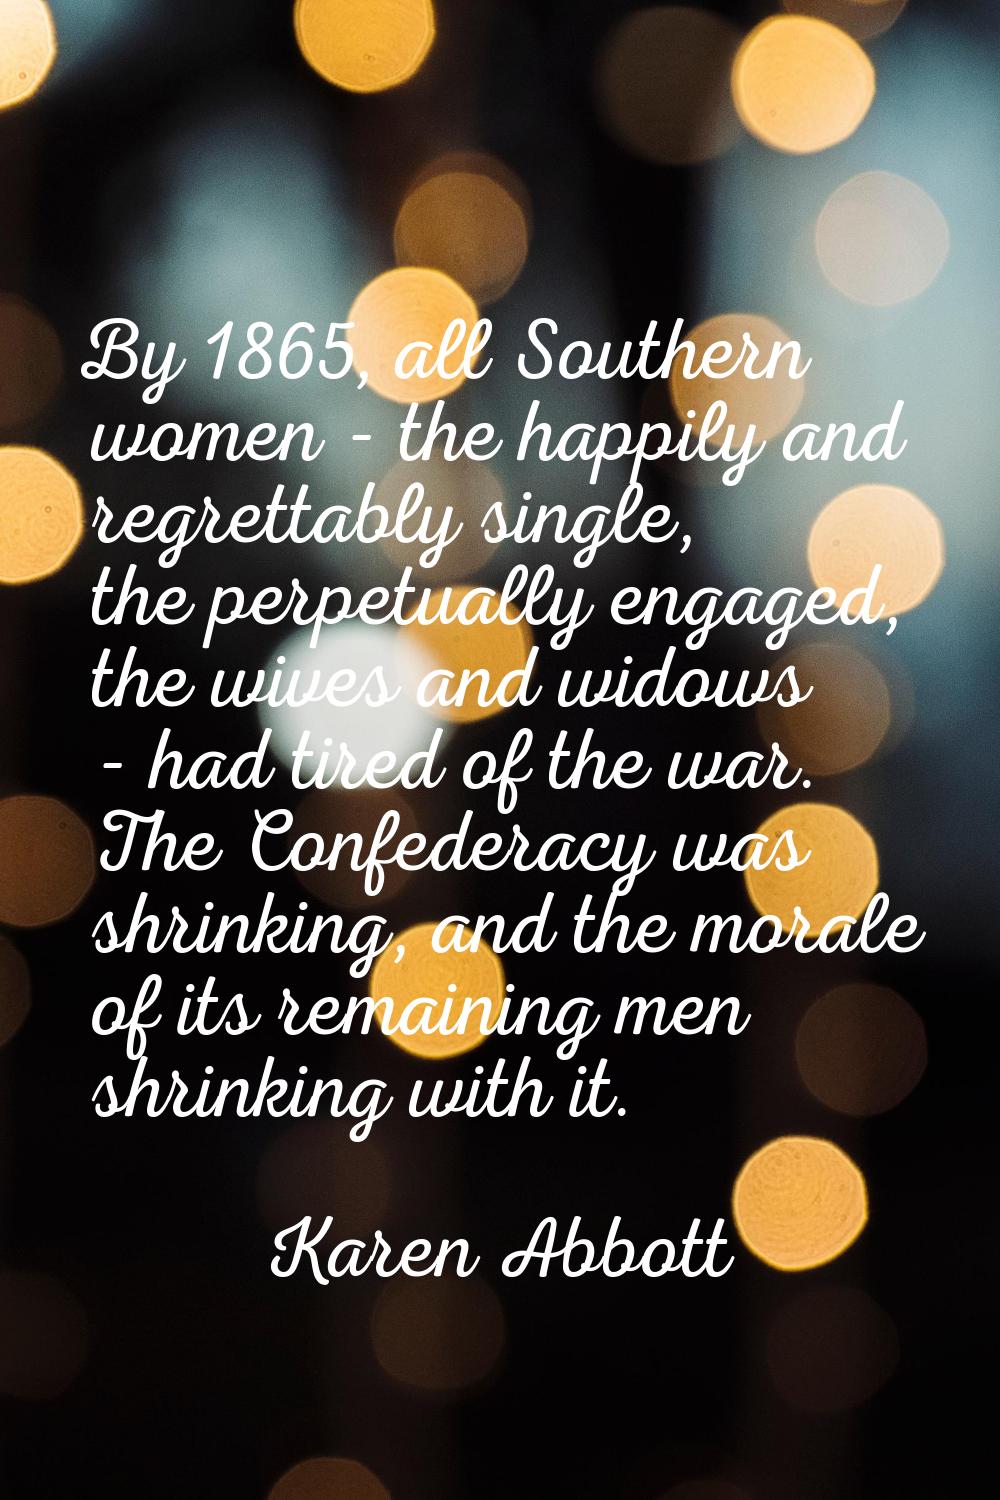 By 1865, all Southern women - the happily and regrettably single, the perpetually engaged, the wive